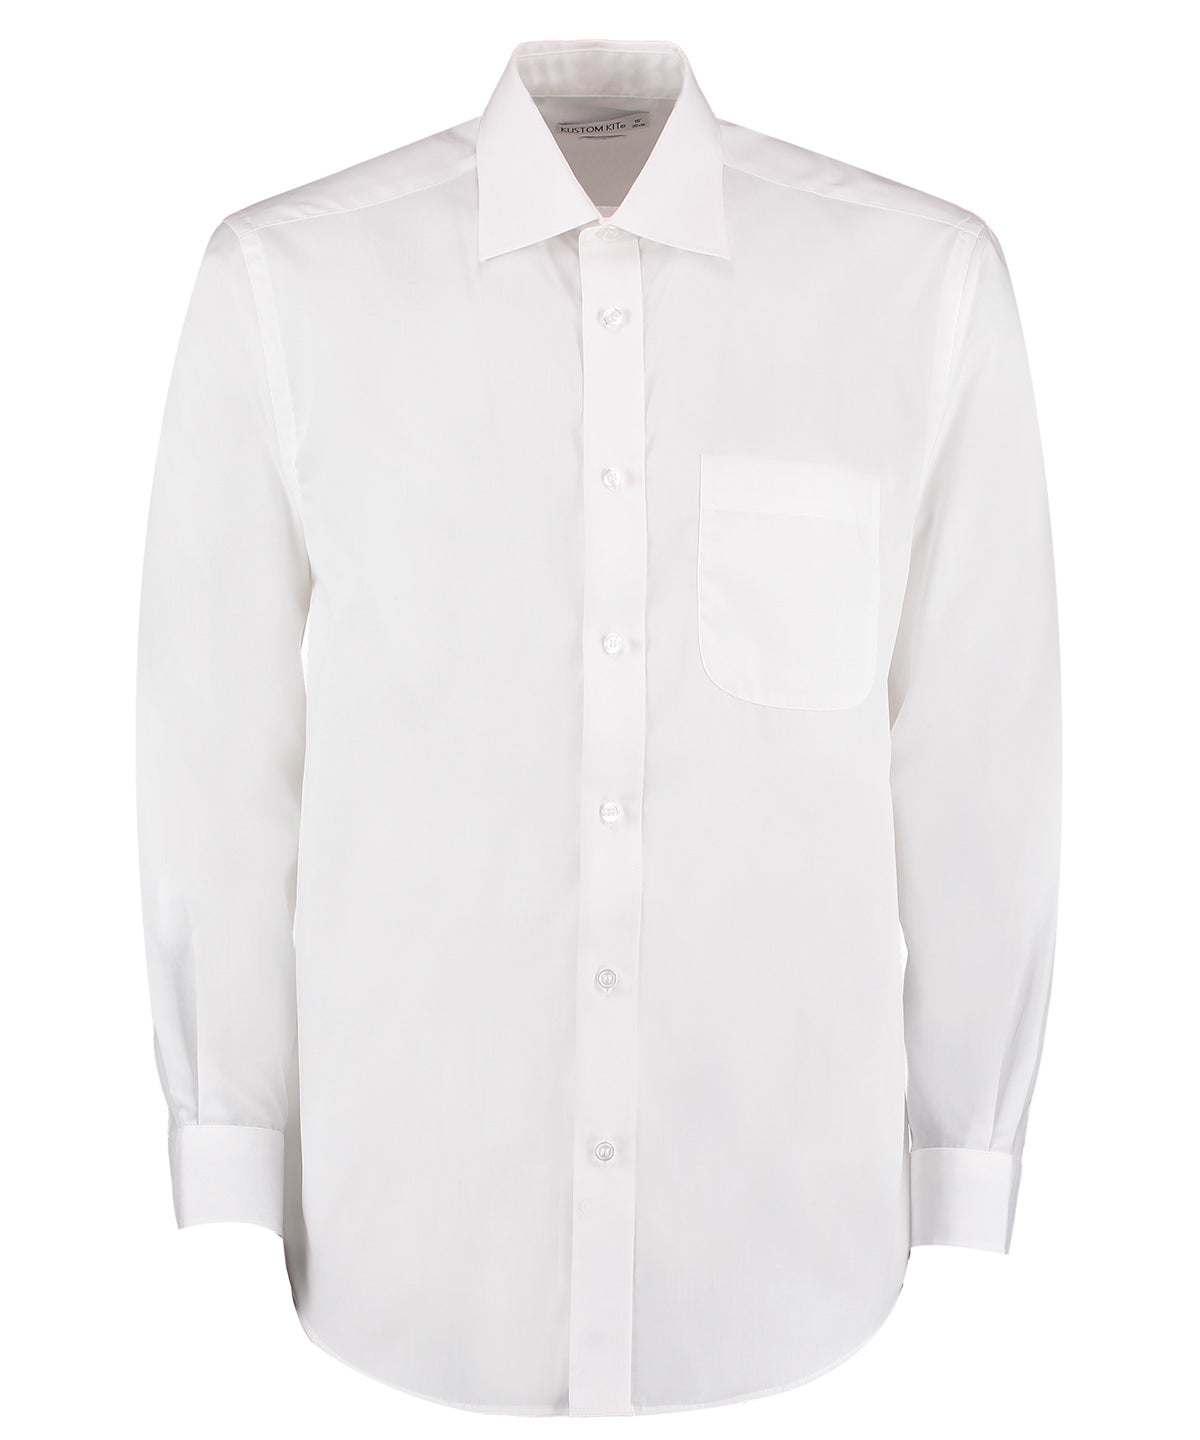 Bolir - Business Shirt Long-sleeved (classic Fit)